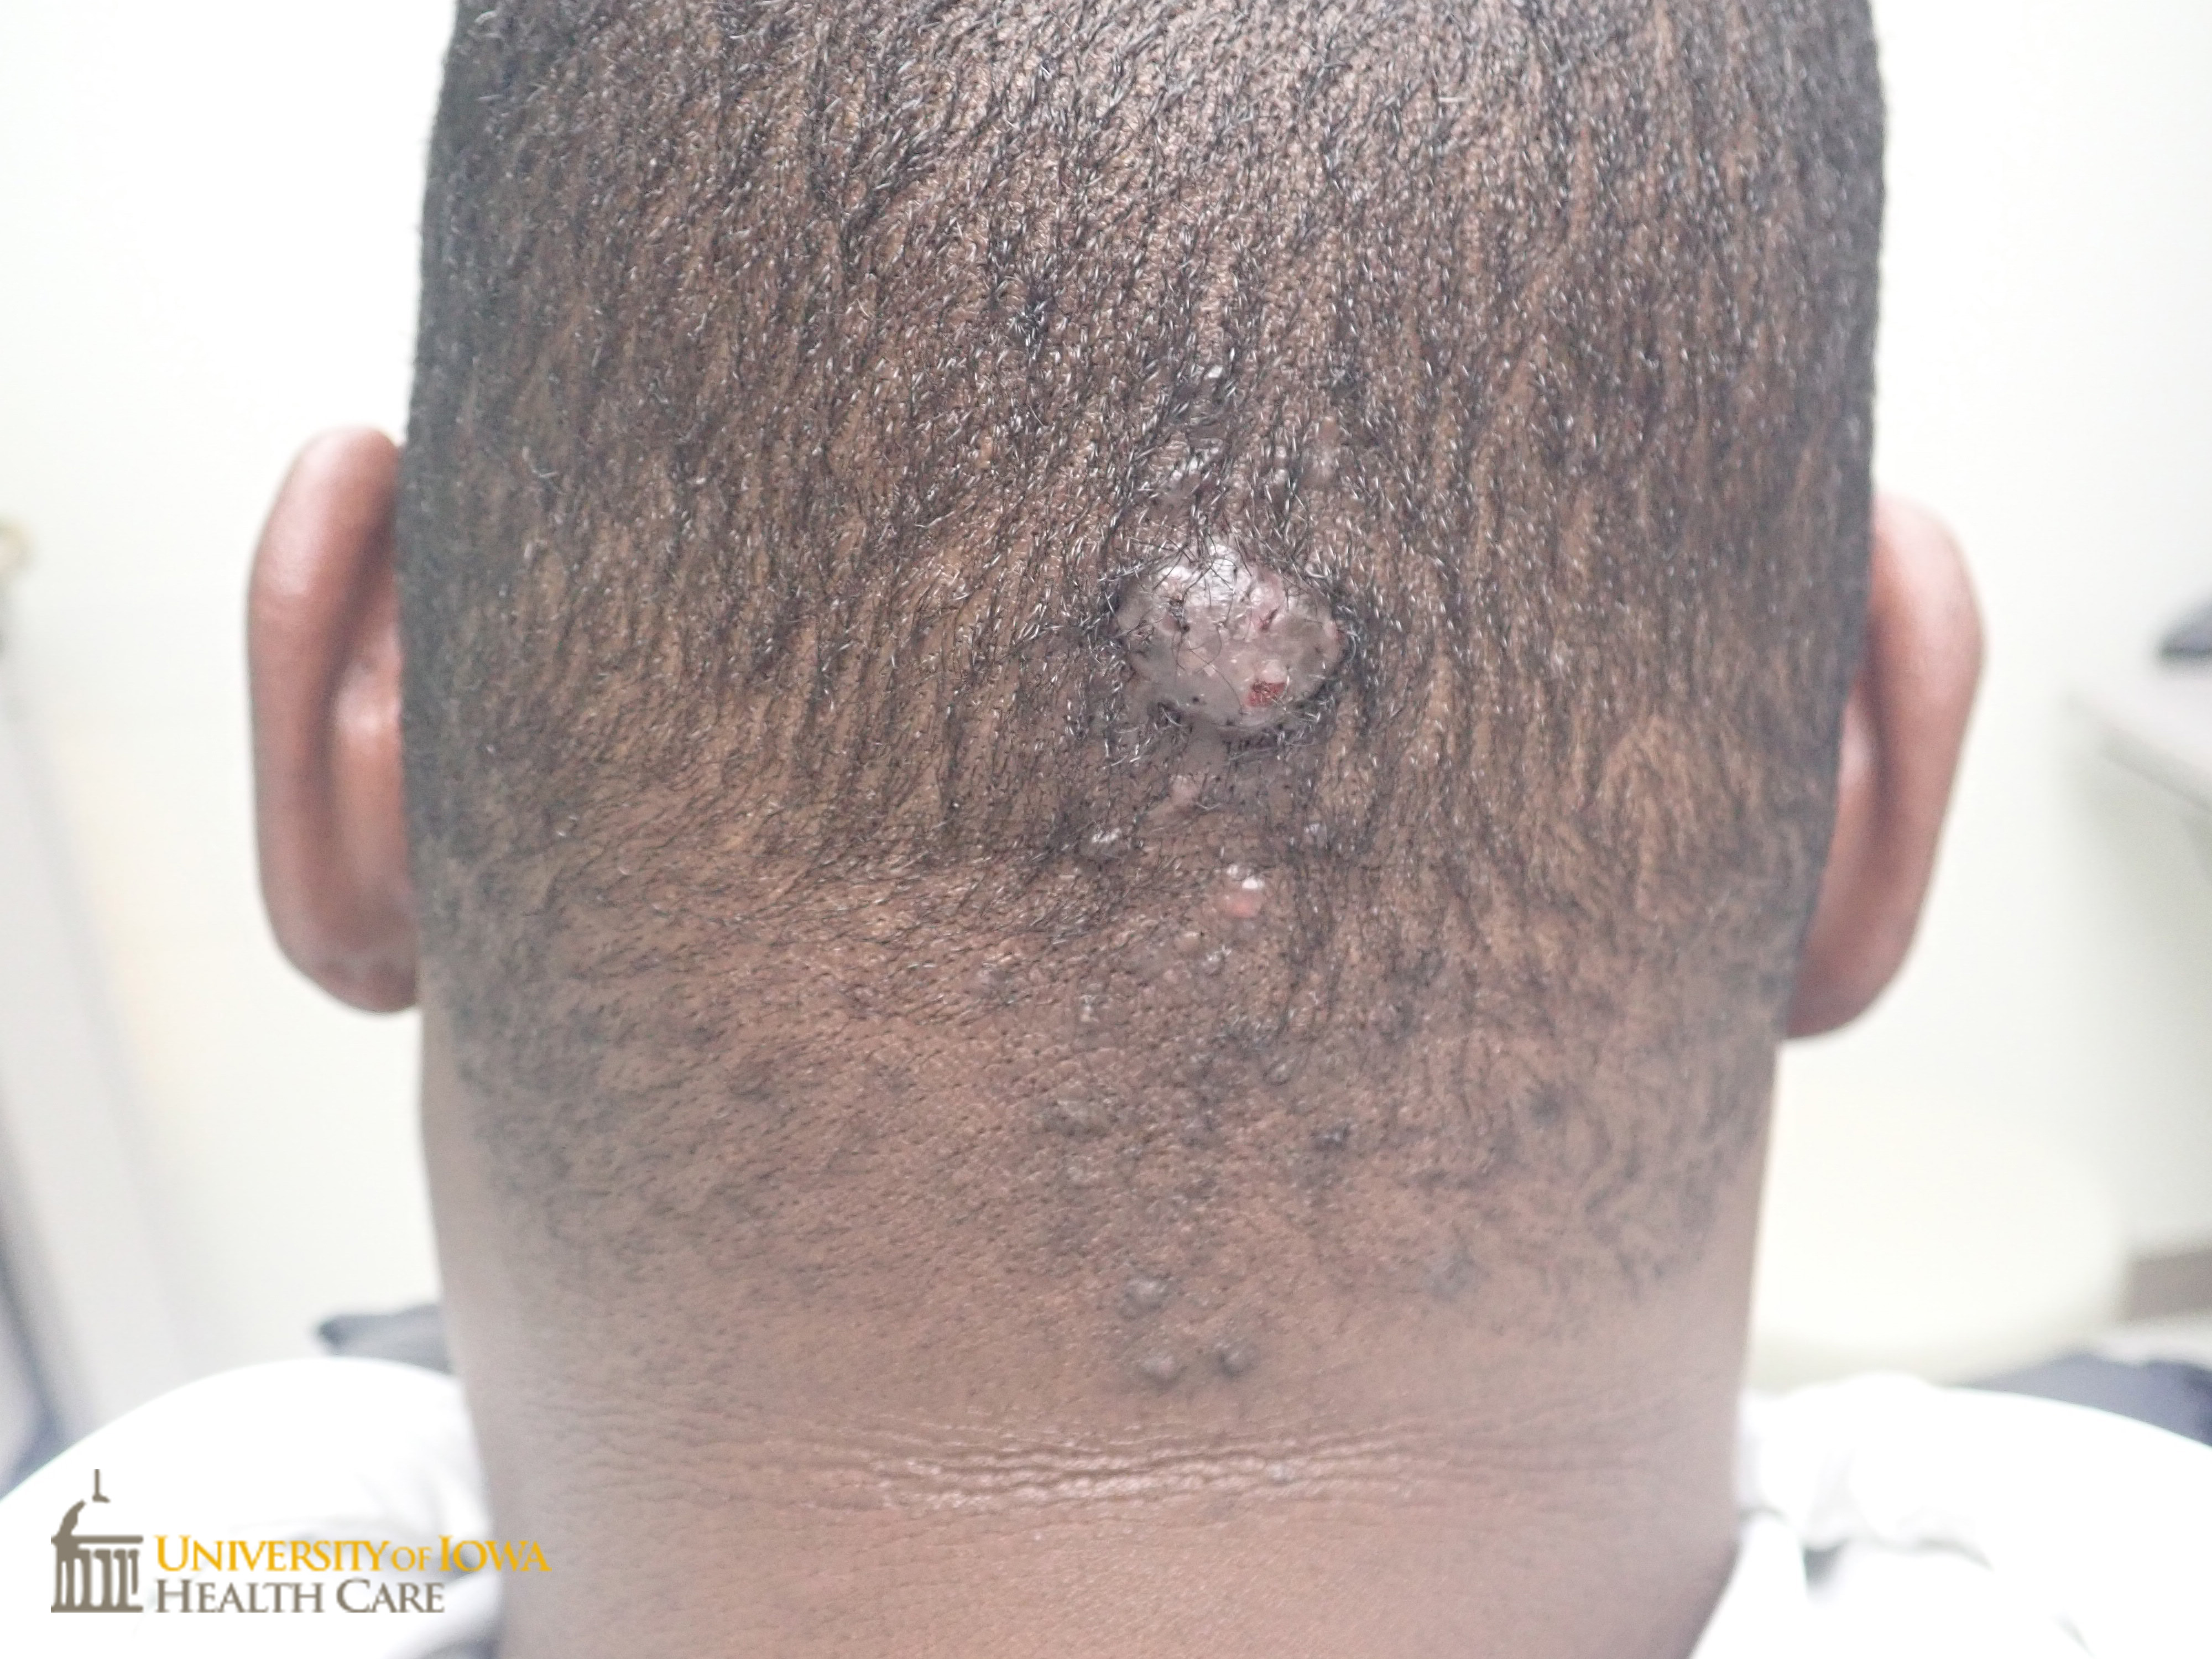 Pink keloidal papules  and nodule on the occipital scalp. (click images for higher resolution).